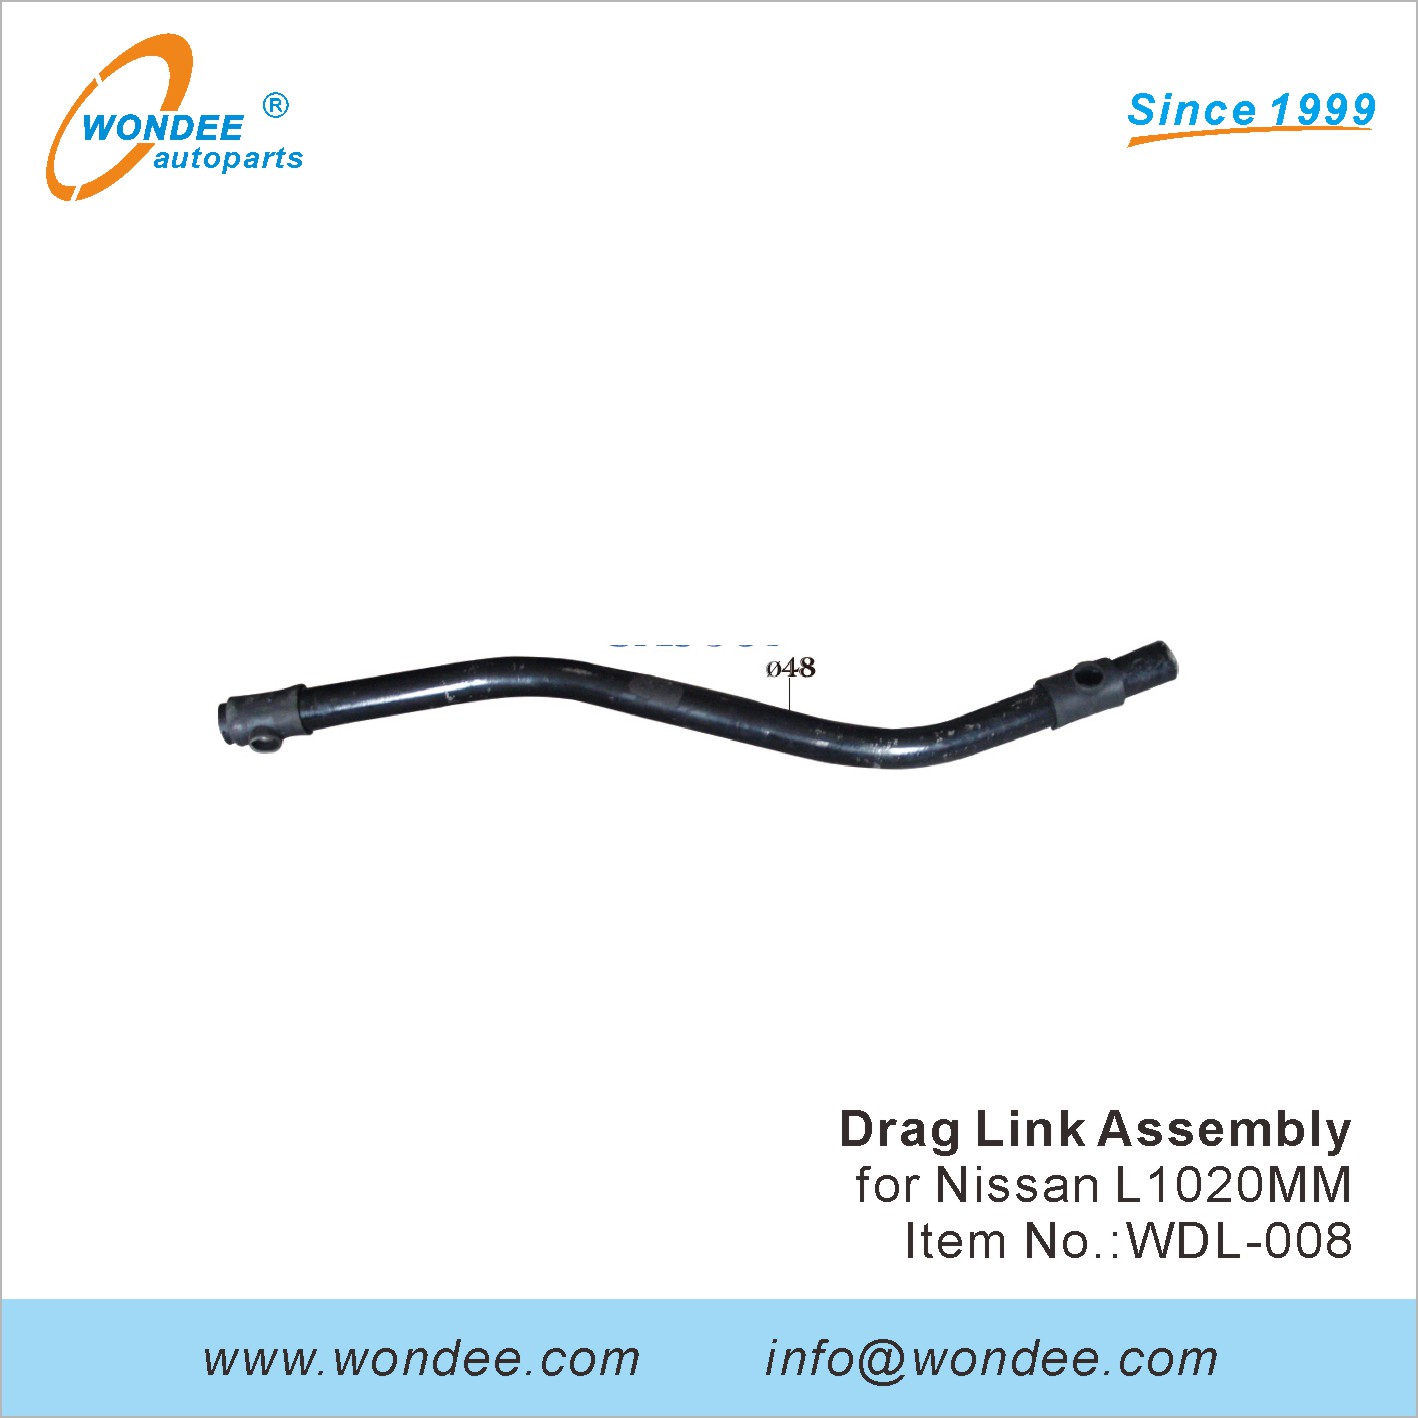 WONDEE drag link assembly (8)